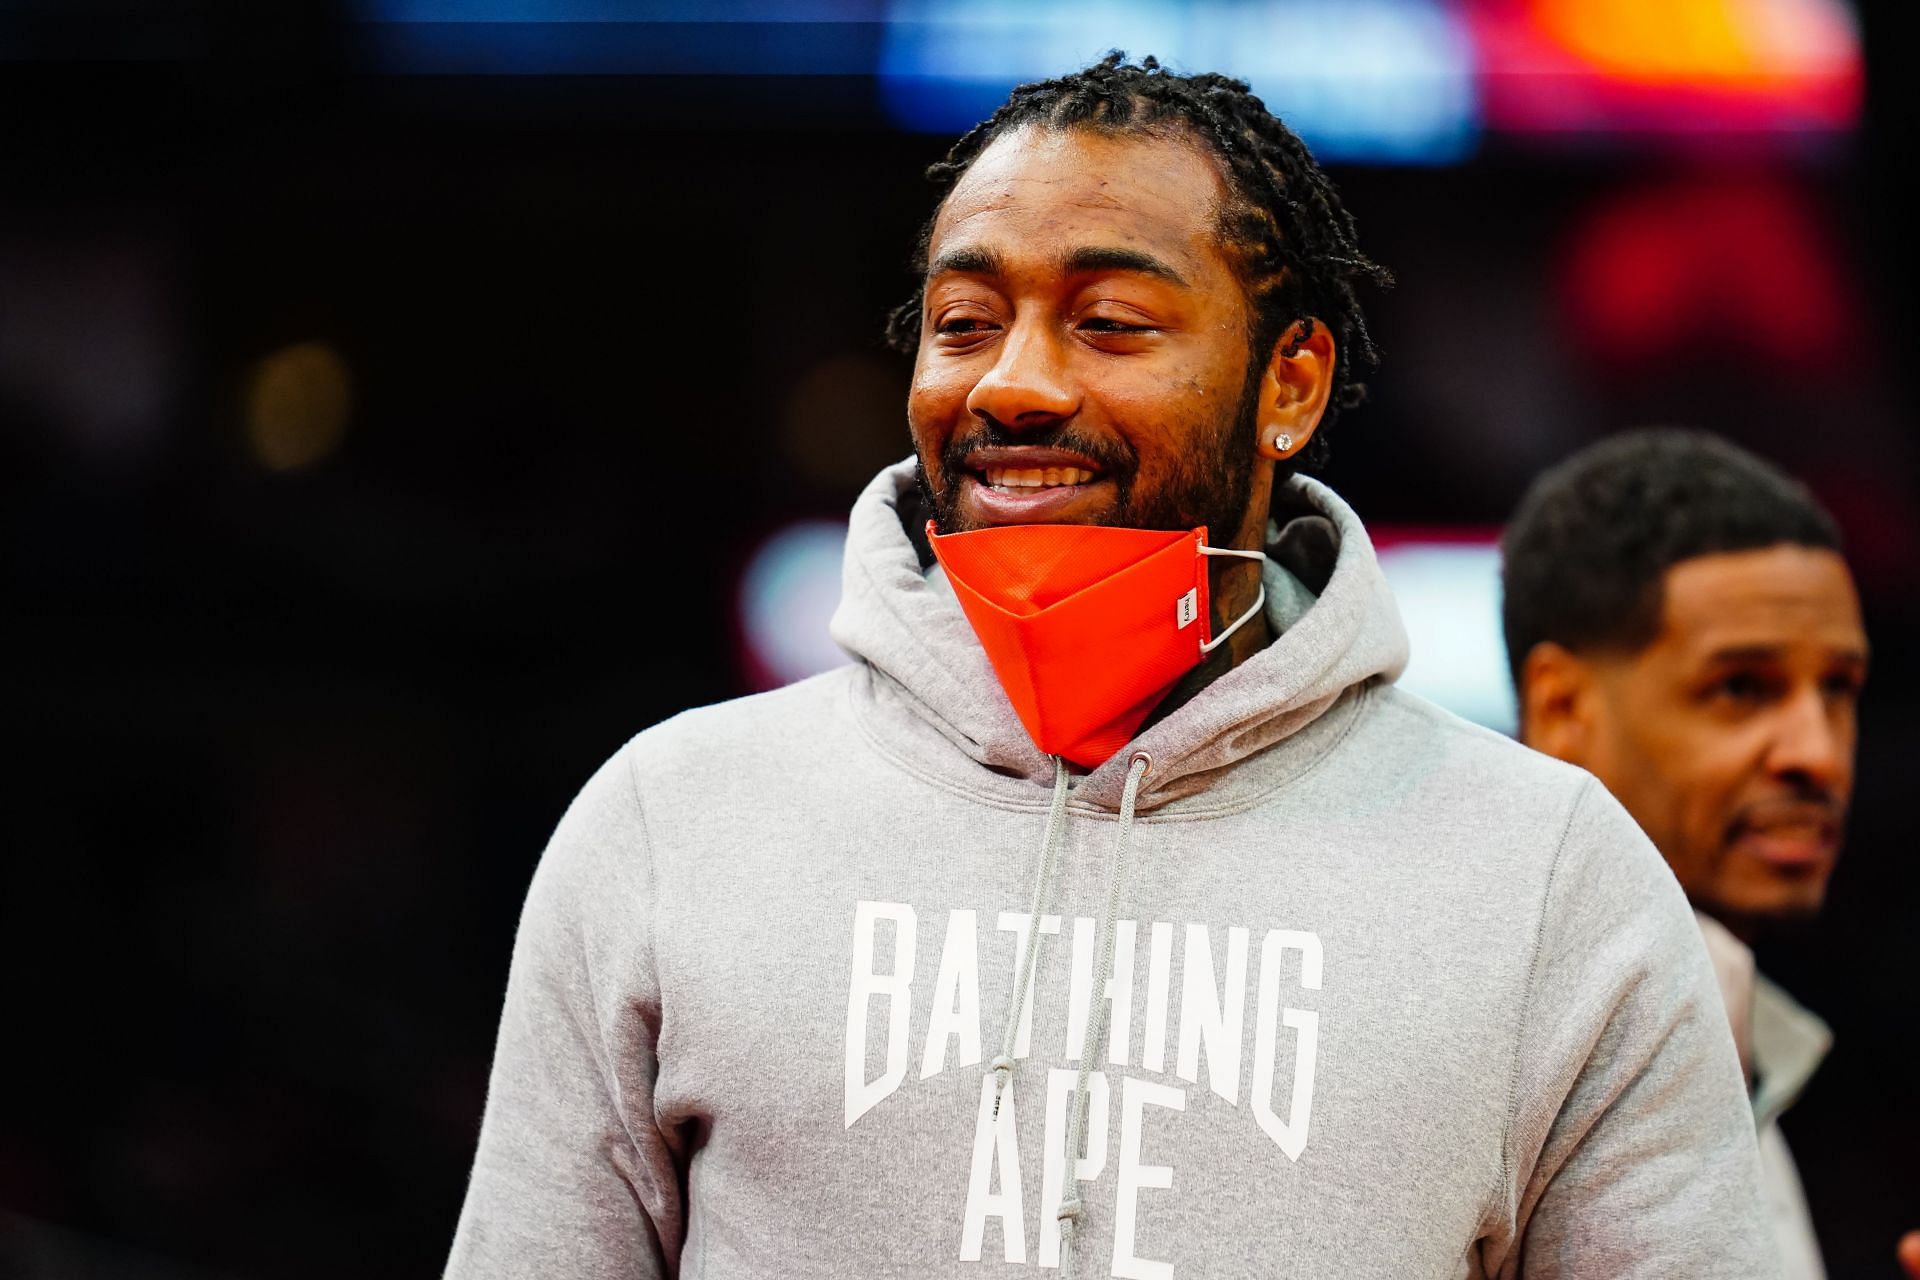 John Wall and the Houston Rockets reached an agreement regarding a buyout this week.